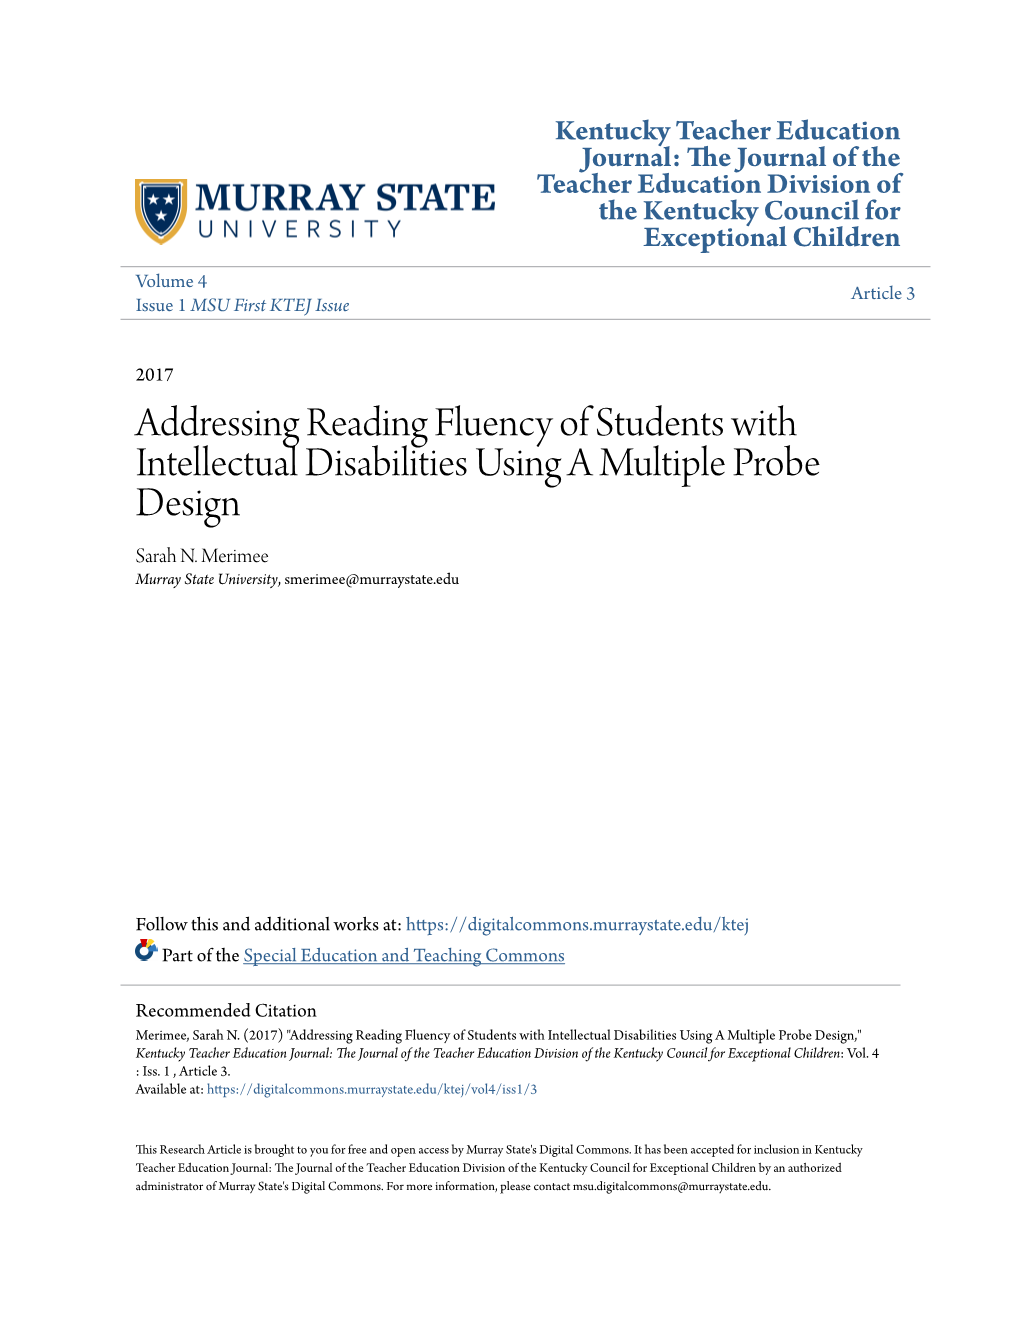 Addressing Reading Fluency of Students with Intellectual Disabilities Using a Multiple Probe Design Sarah N